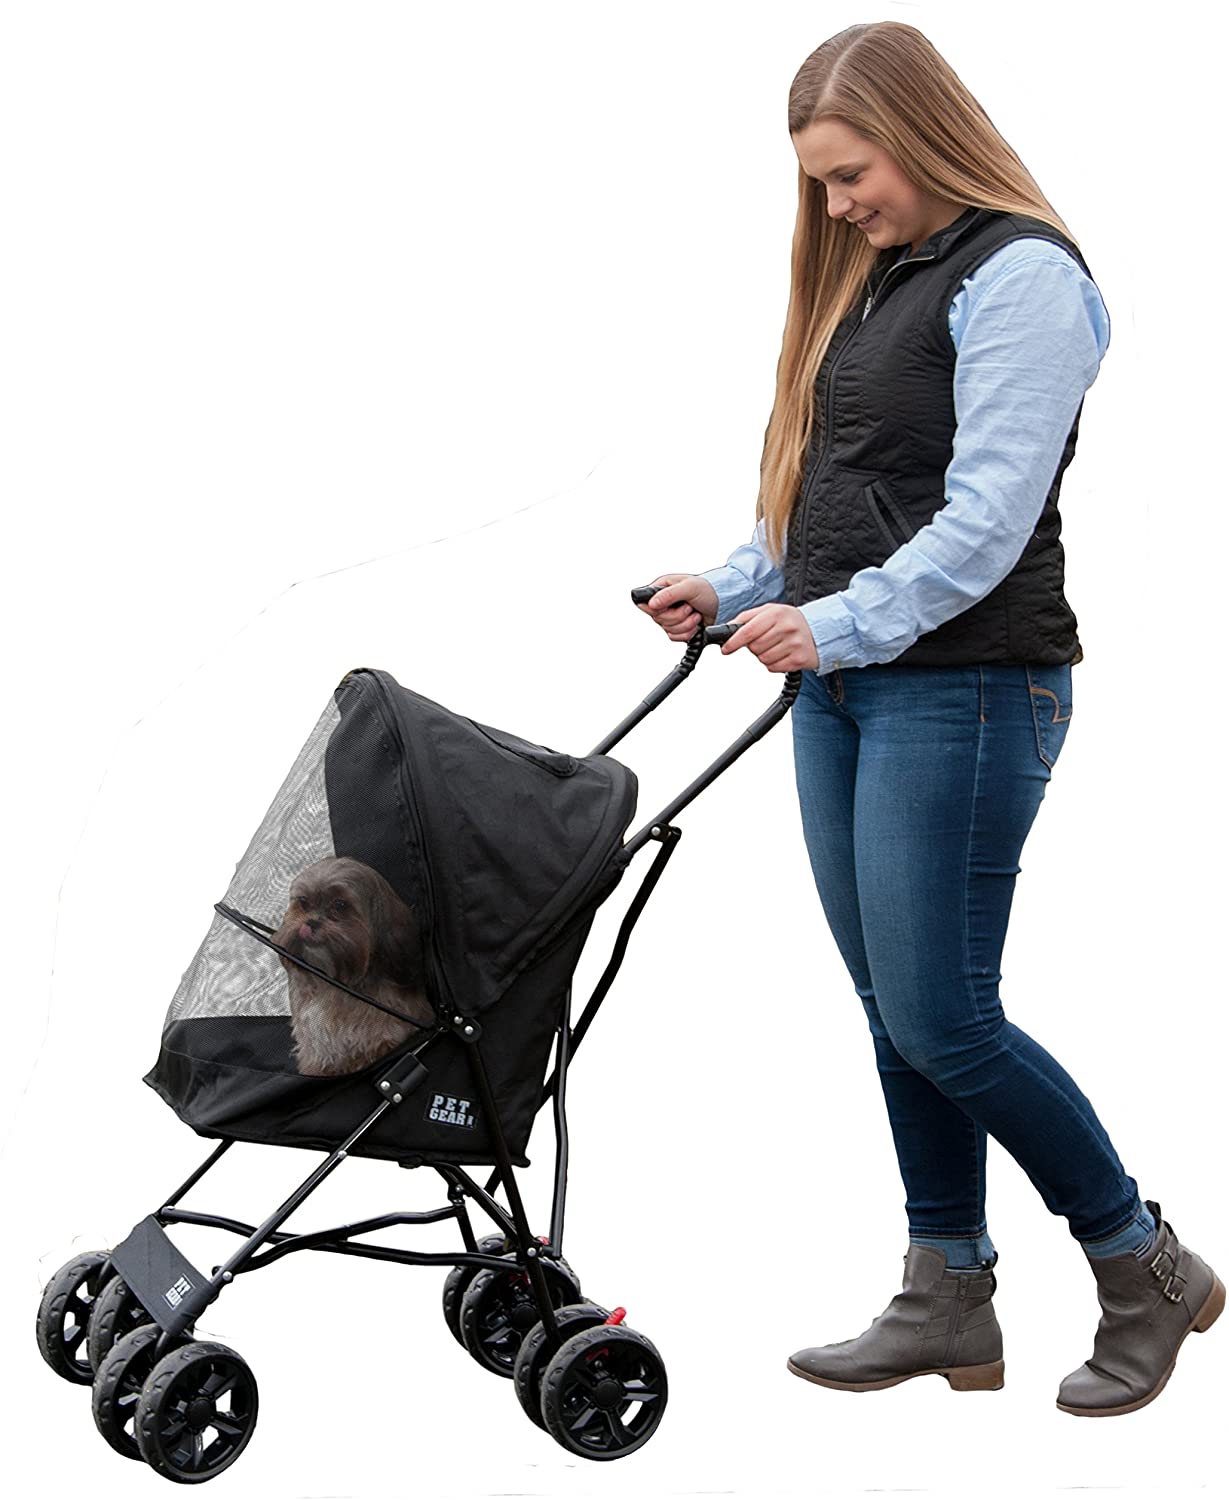 Riyyow Luxury Dog Stroller, Dog Strollers for Large Dogs Premium Pet Pram  Pushchair 4 Wheel Pet Gear Pet Stroller for Cat, Dog and More, Foldable